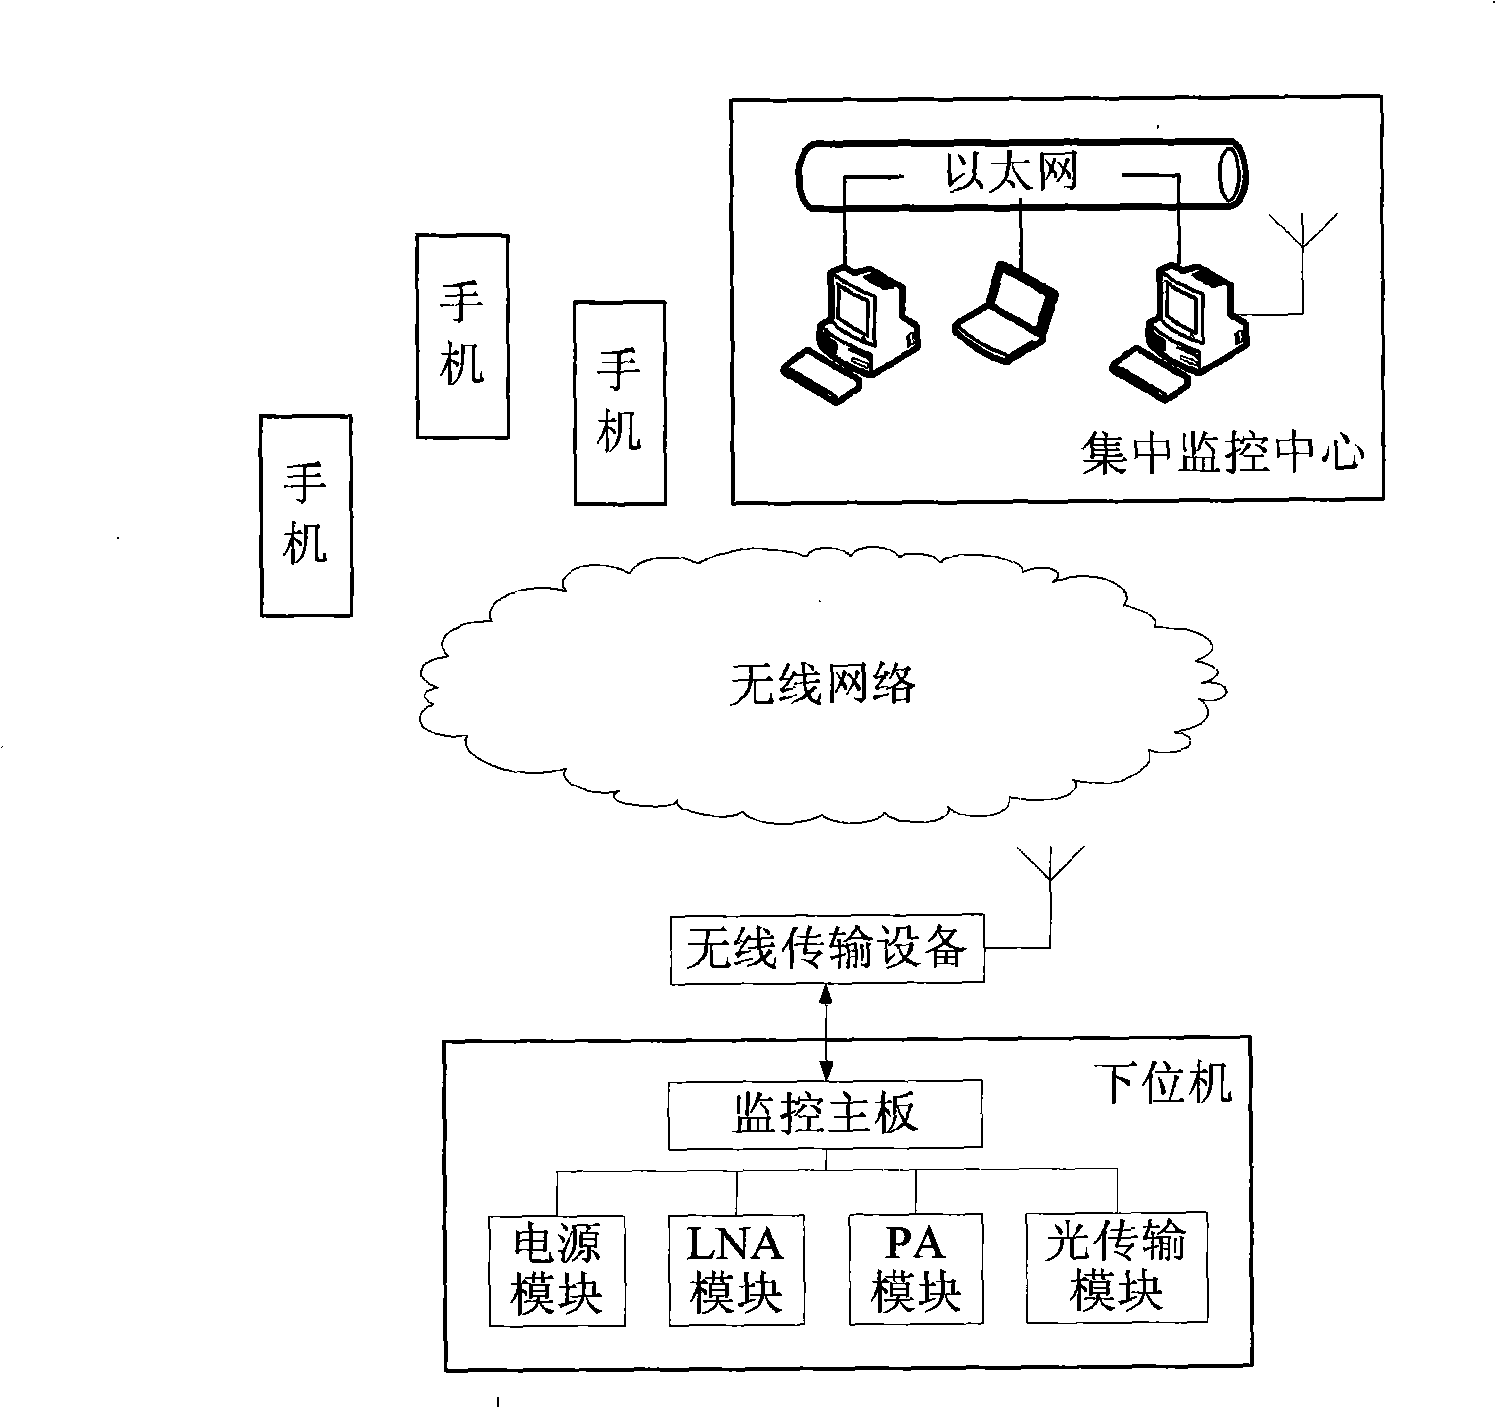 Repeater monitoring system and method